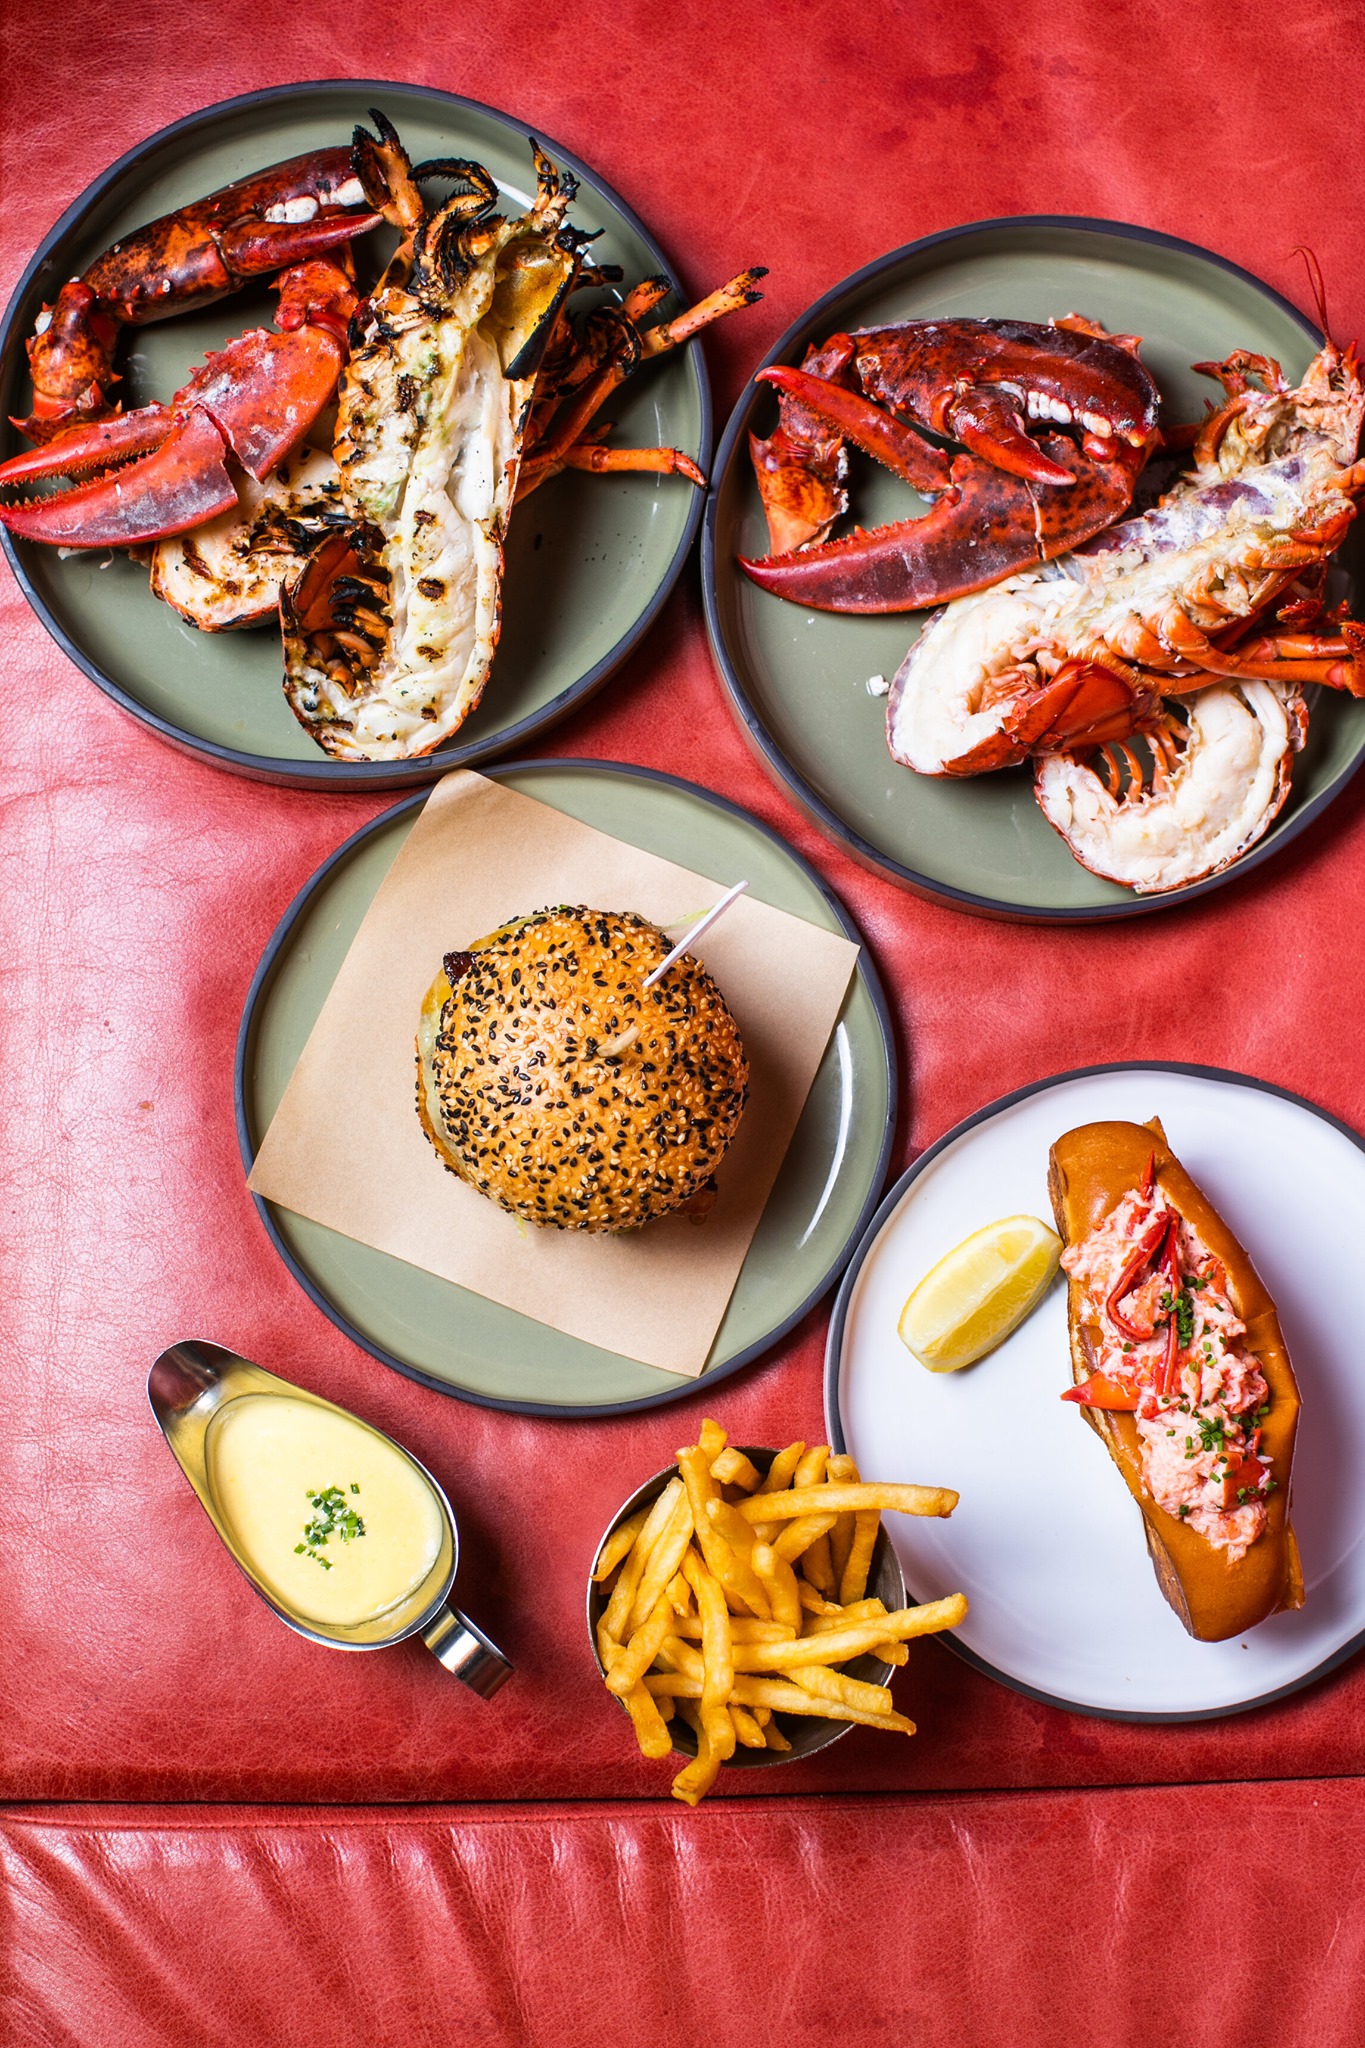 burger & lobster's two pax combo meal